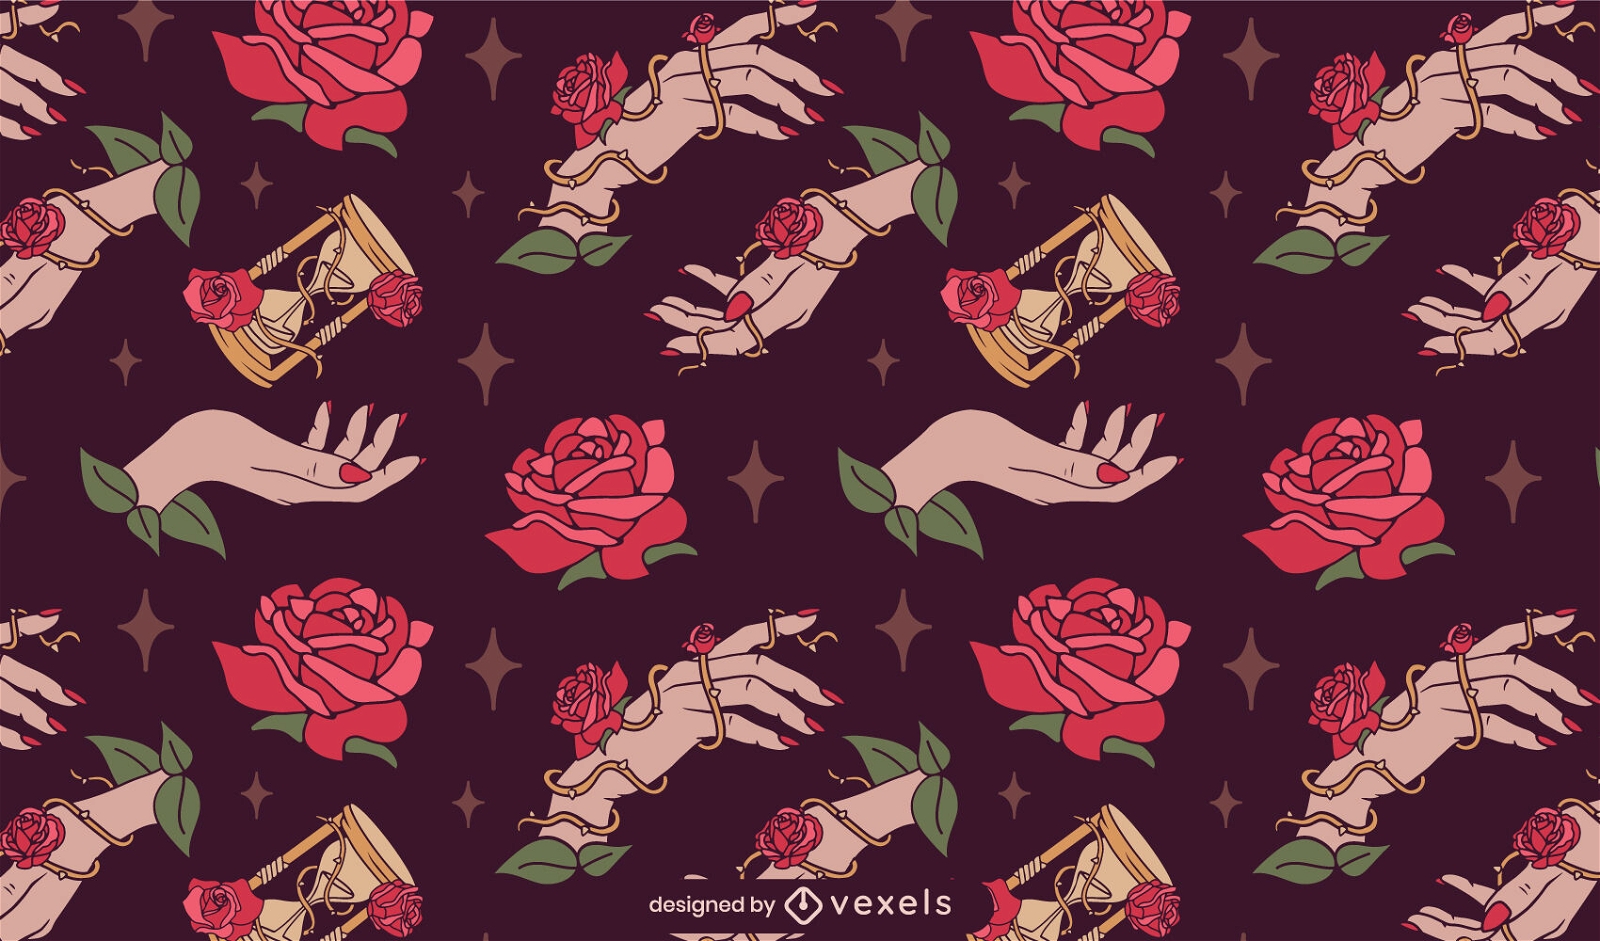 Hands and roses nature pattern design